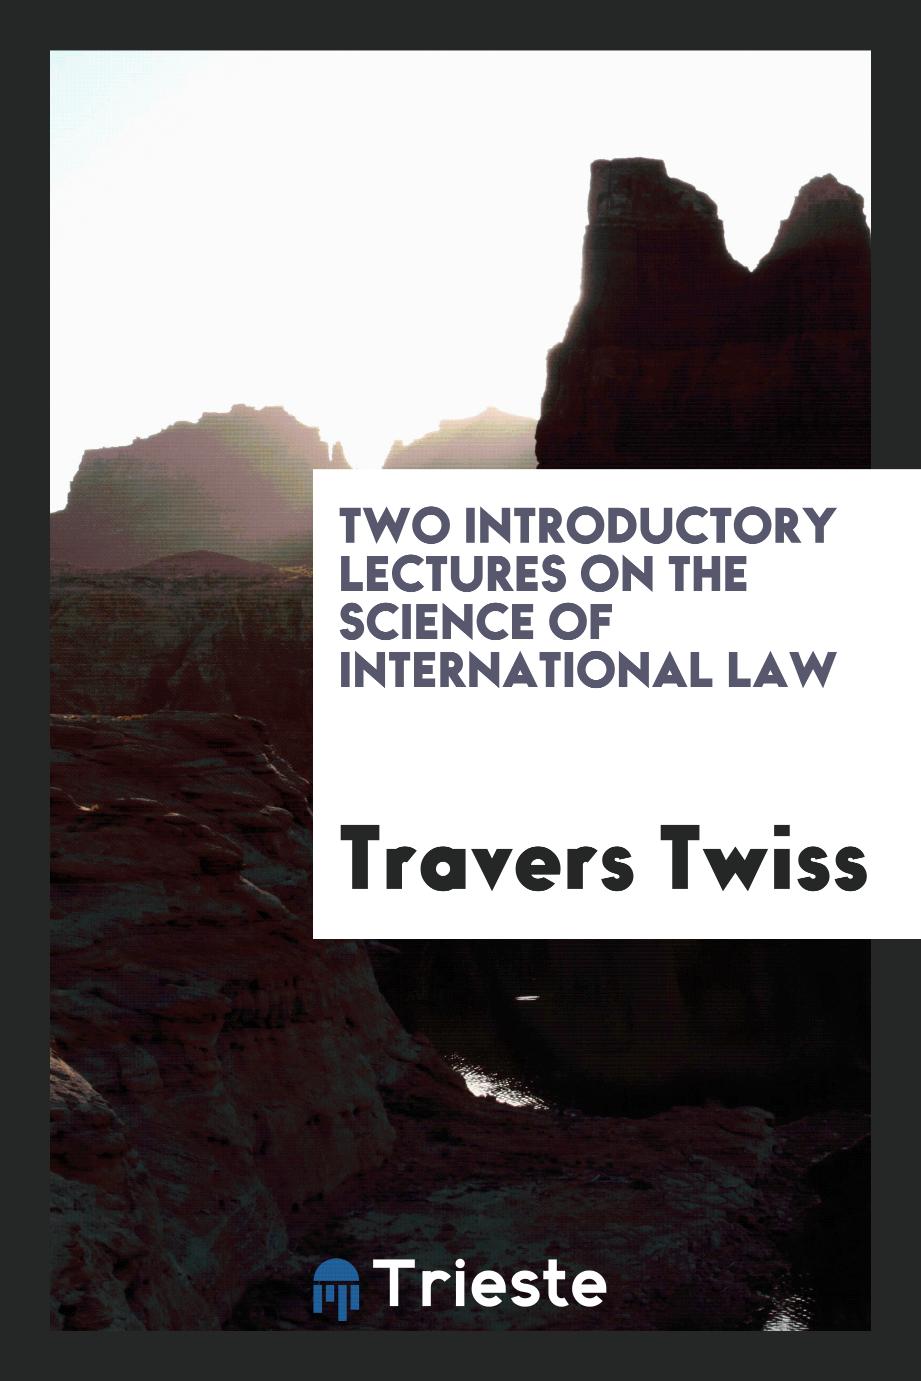 Two Introductory Lectures on the Science of International Law